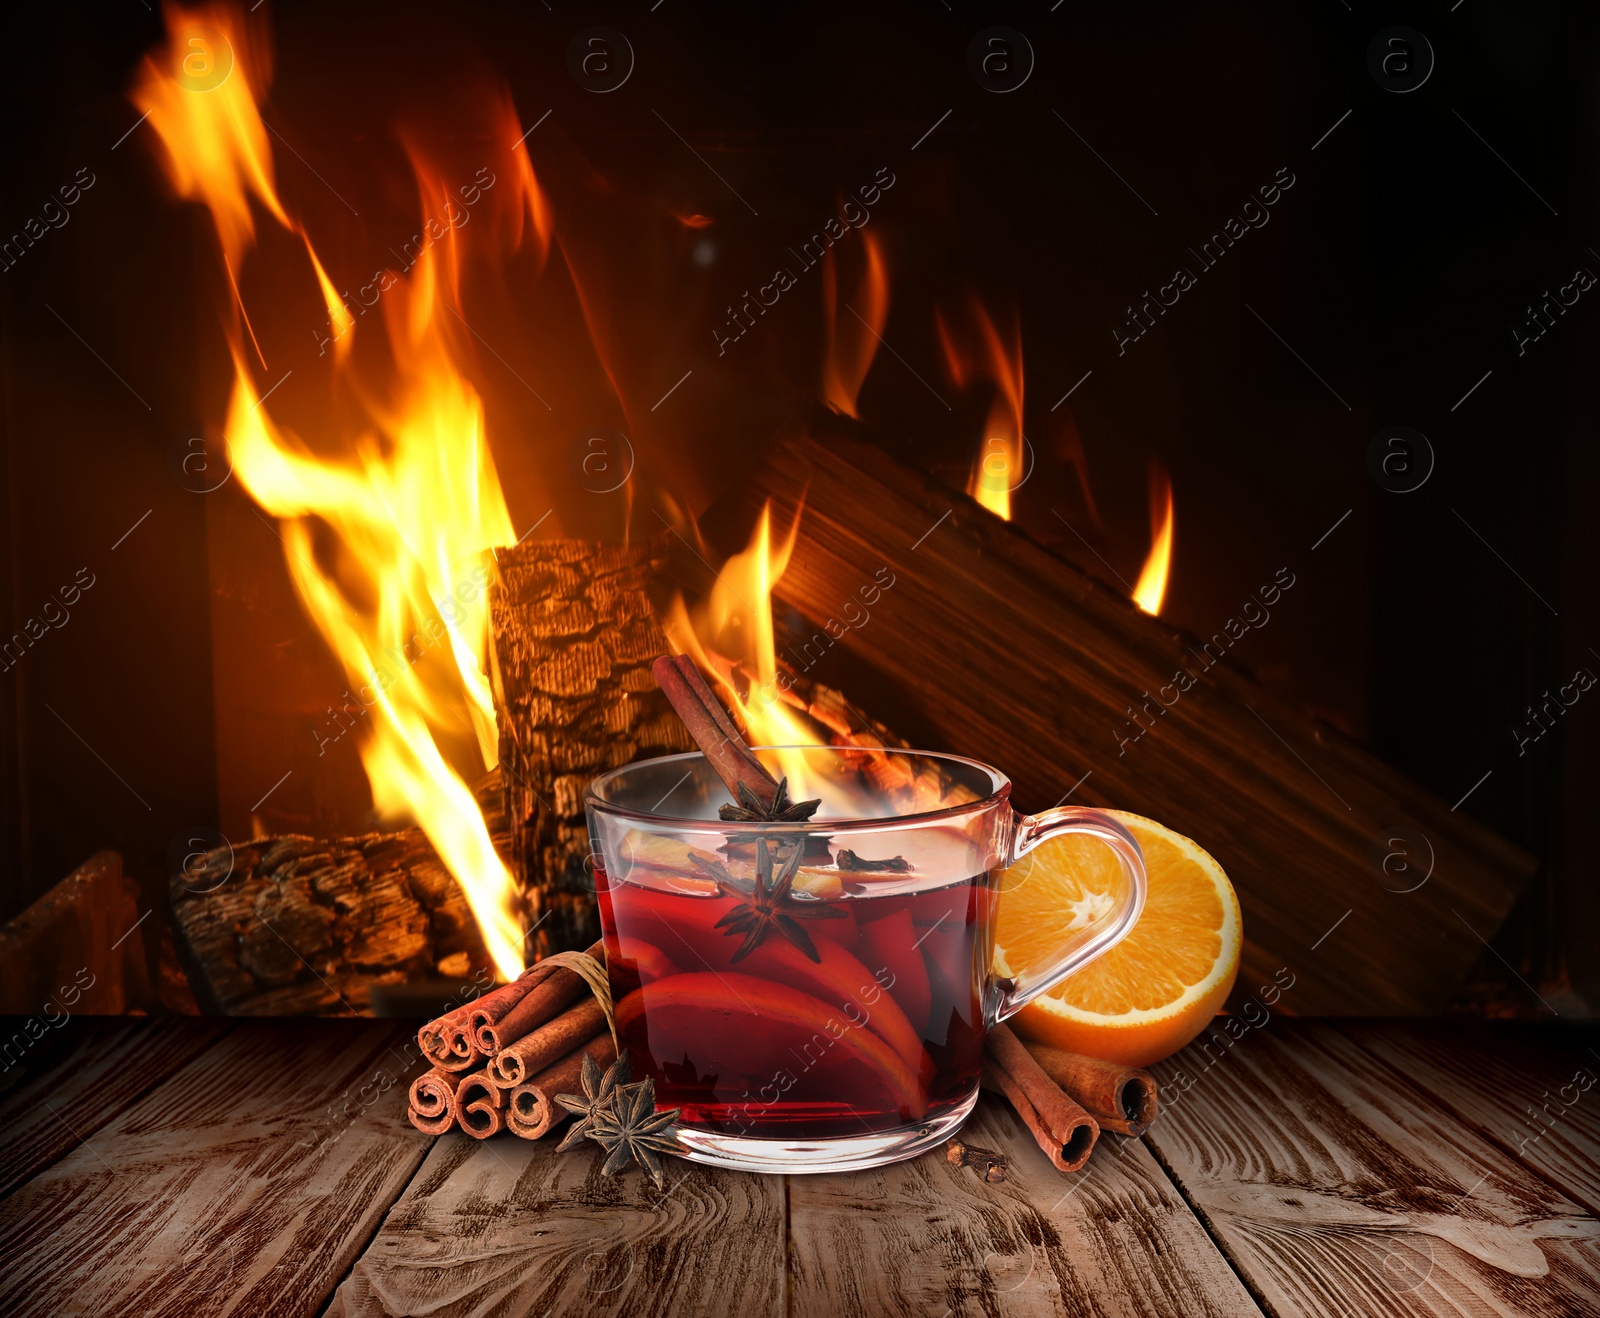 Image of Mulled wine in glass cup on wooden table near fireplace